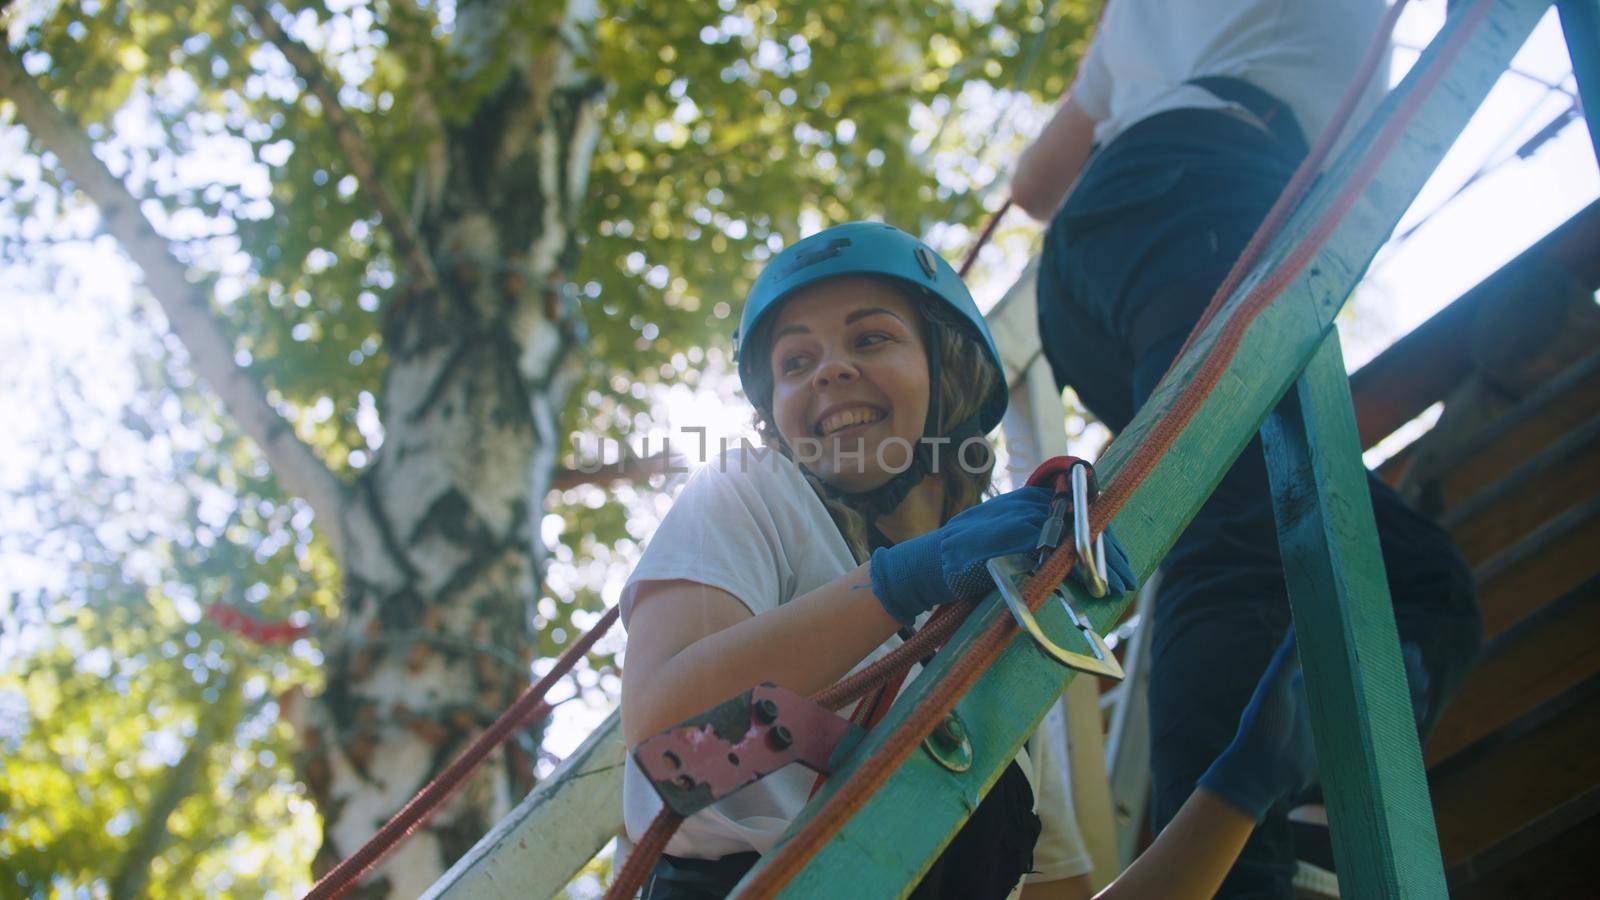 Rope adventure - couple walking upstairs to the attraction area - woman smiling. Mid shot